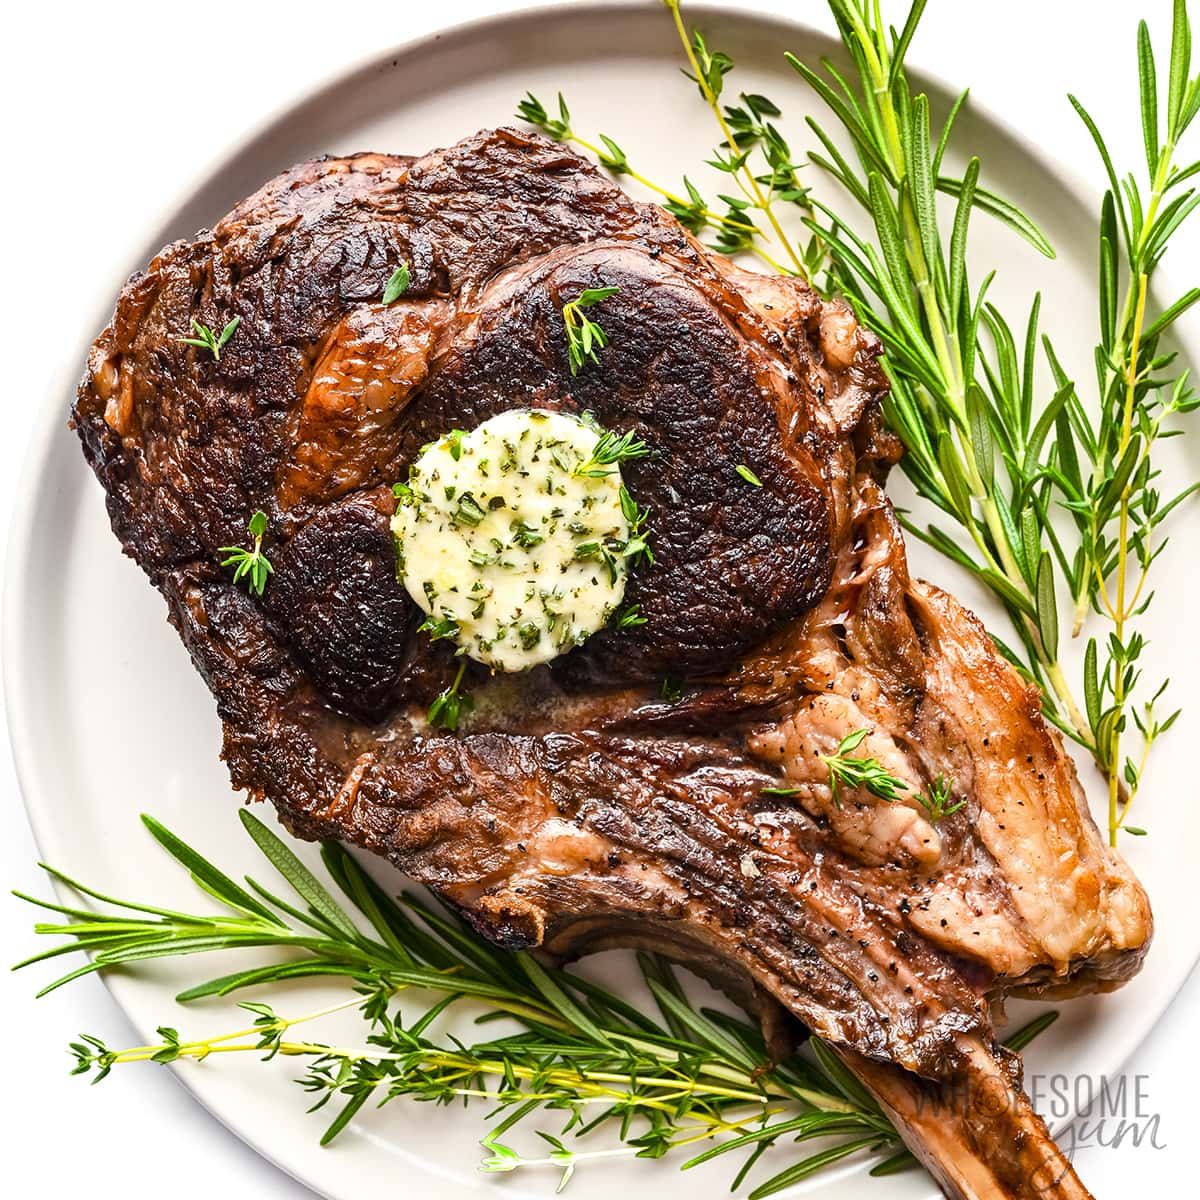 Tomahawk steak recipe topped with compound butter.